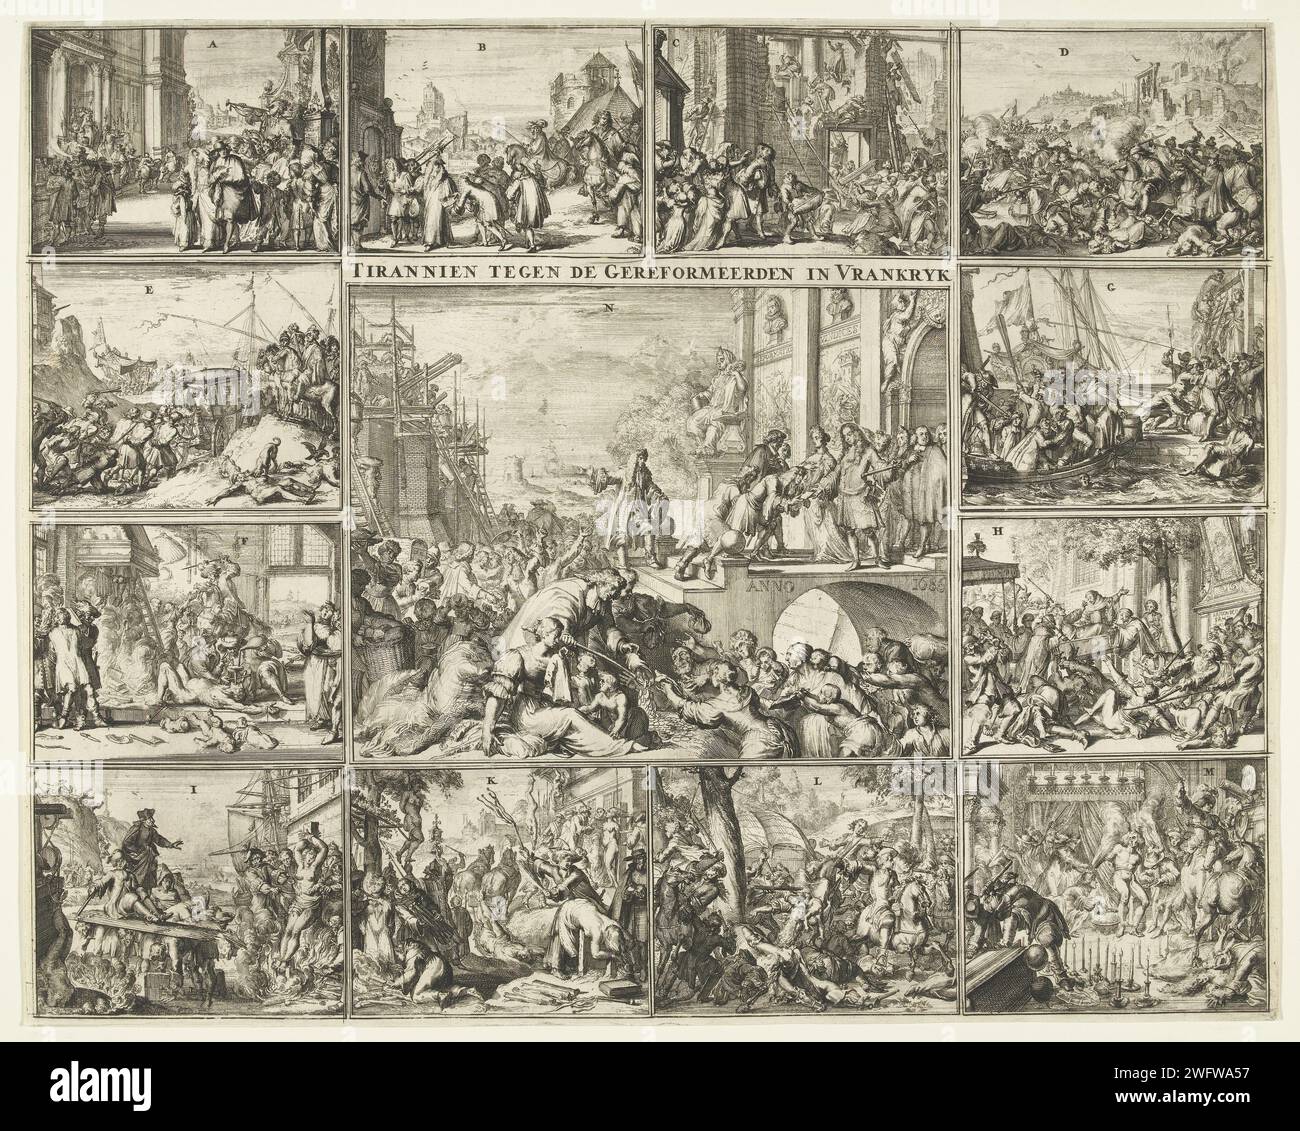 Persecution of the Protestants in France after the revocation of the Edict van Nantes, 1685-1686, Romeyn de Hooghe, 1686 print Persecution of the Protestants in France after the revocation of the Edict van Nantes, 1685-1686. Twelve small scenes illustrate the persecution of and the atrocities of the Huguenots in France. In the central large performance, the States and the Prince of Orange receive the French refugees in the Netherlands. The performances are numbered A-N. The explanatory texts are missing. Netherlands paper etching execution of heretic, e.g. by burning at the stake, 'auto-da-fé' Stock Photo